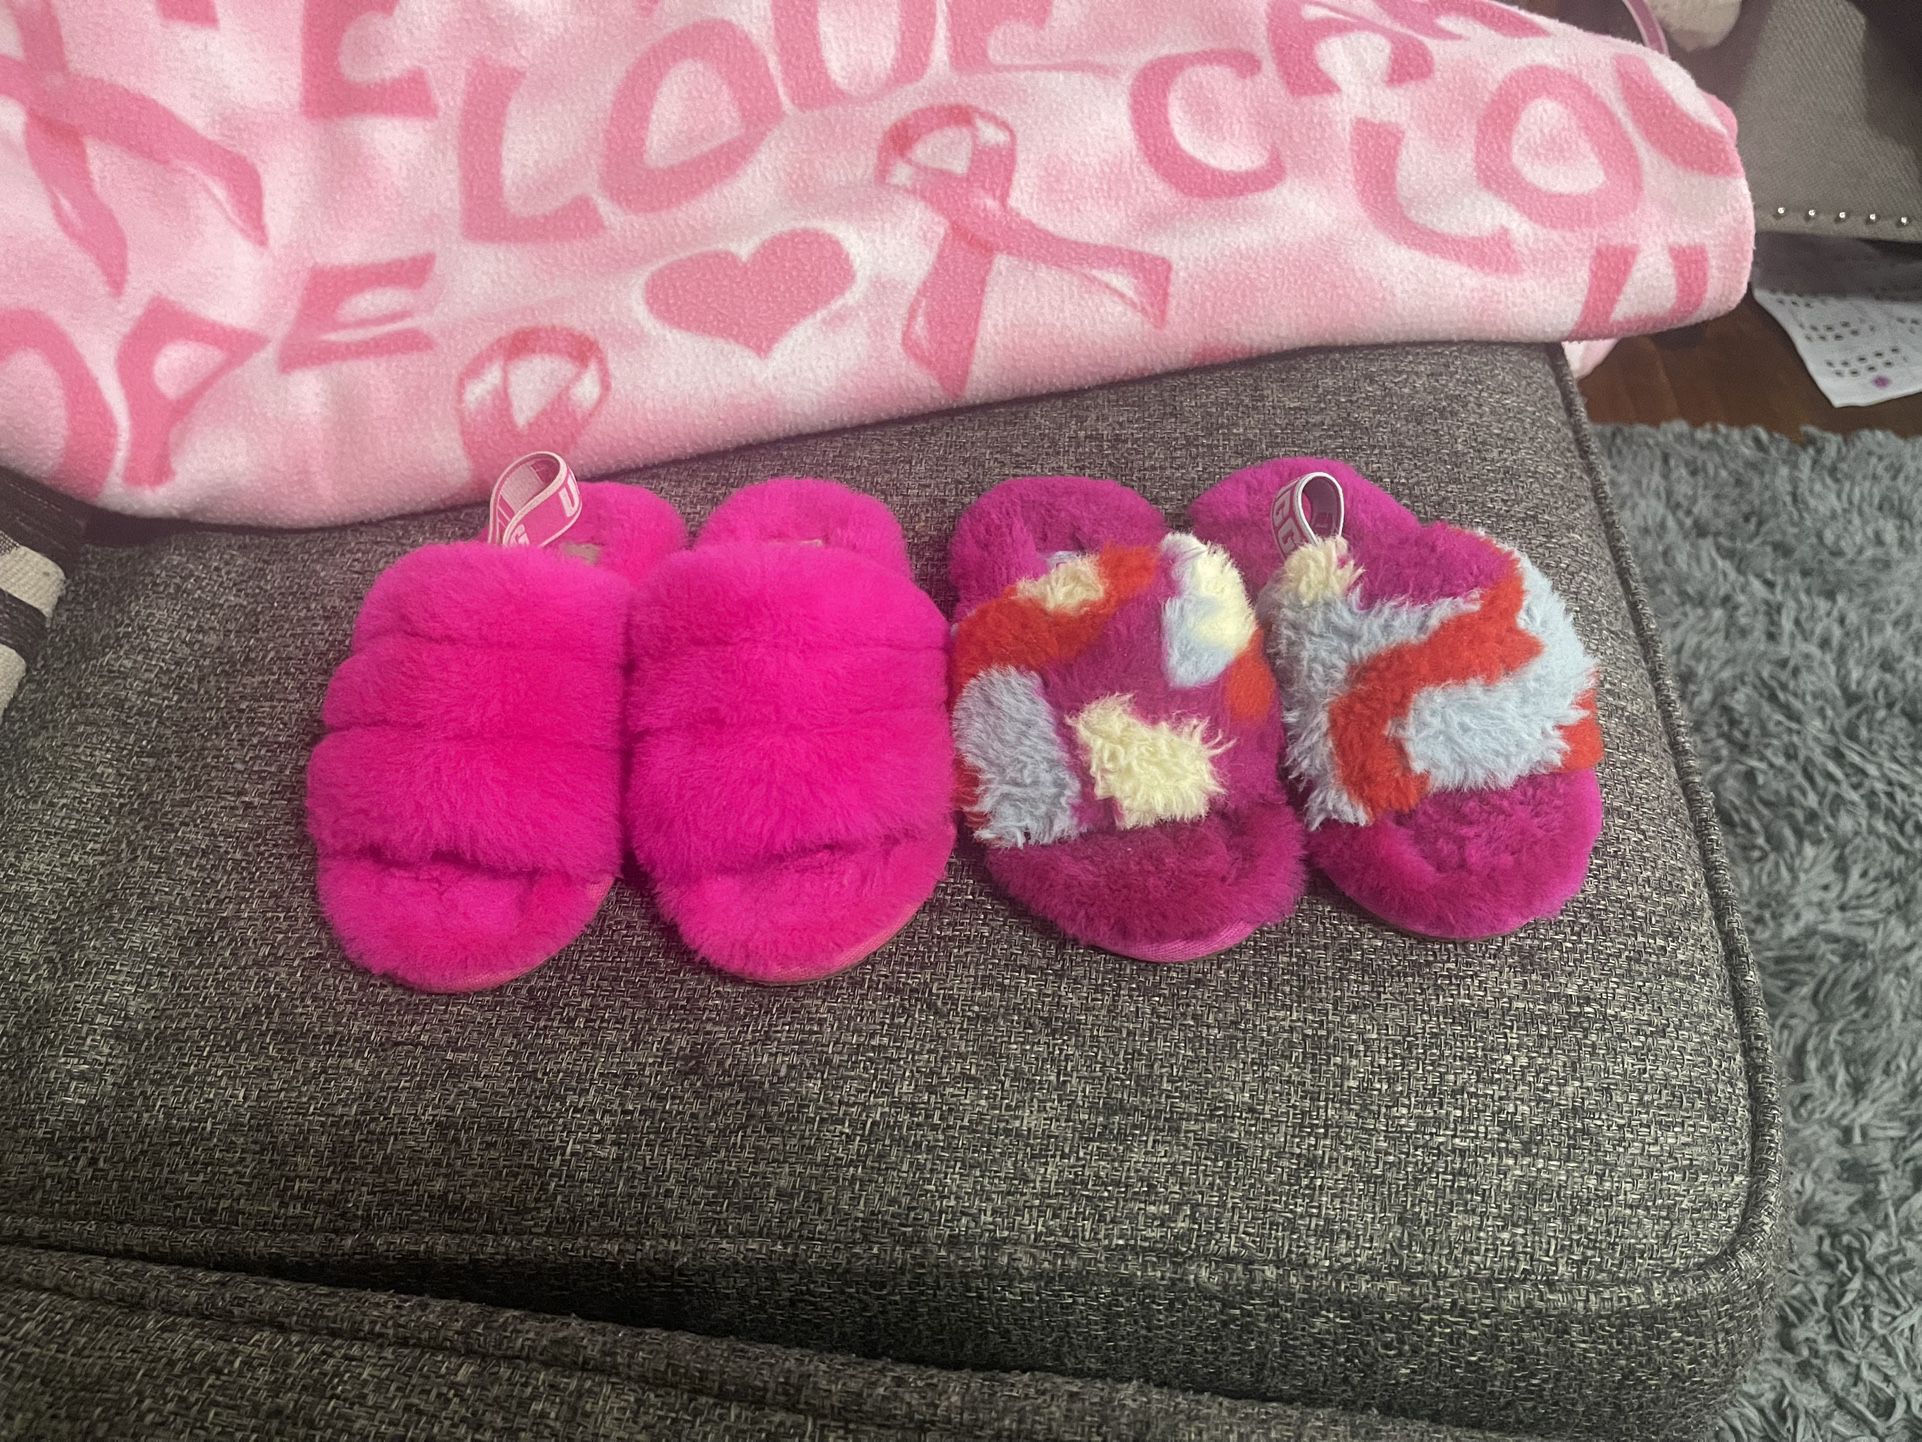 Kids Ugg sandals, size 9, and size 10